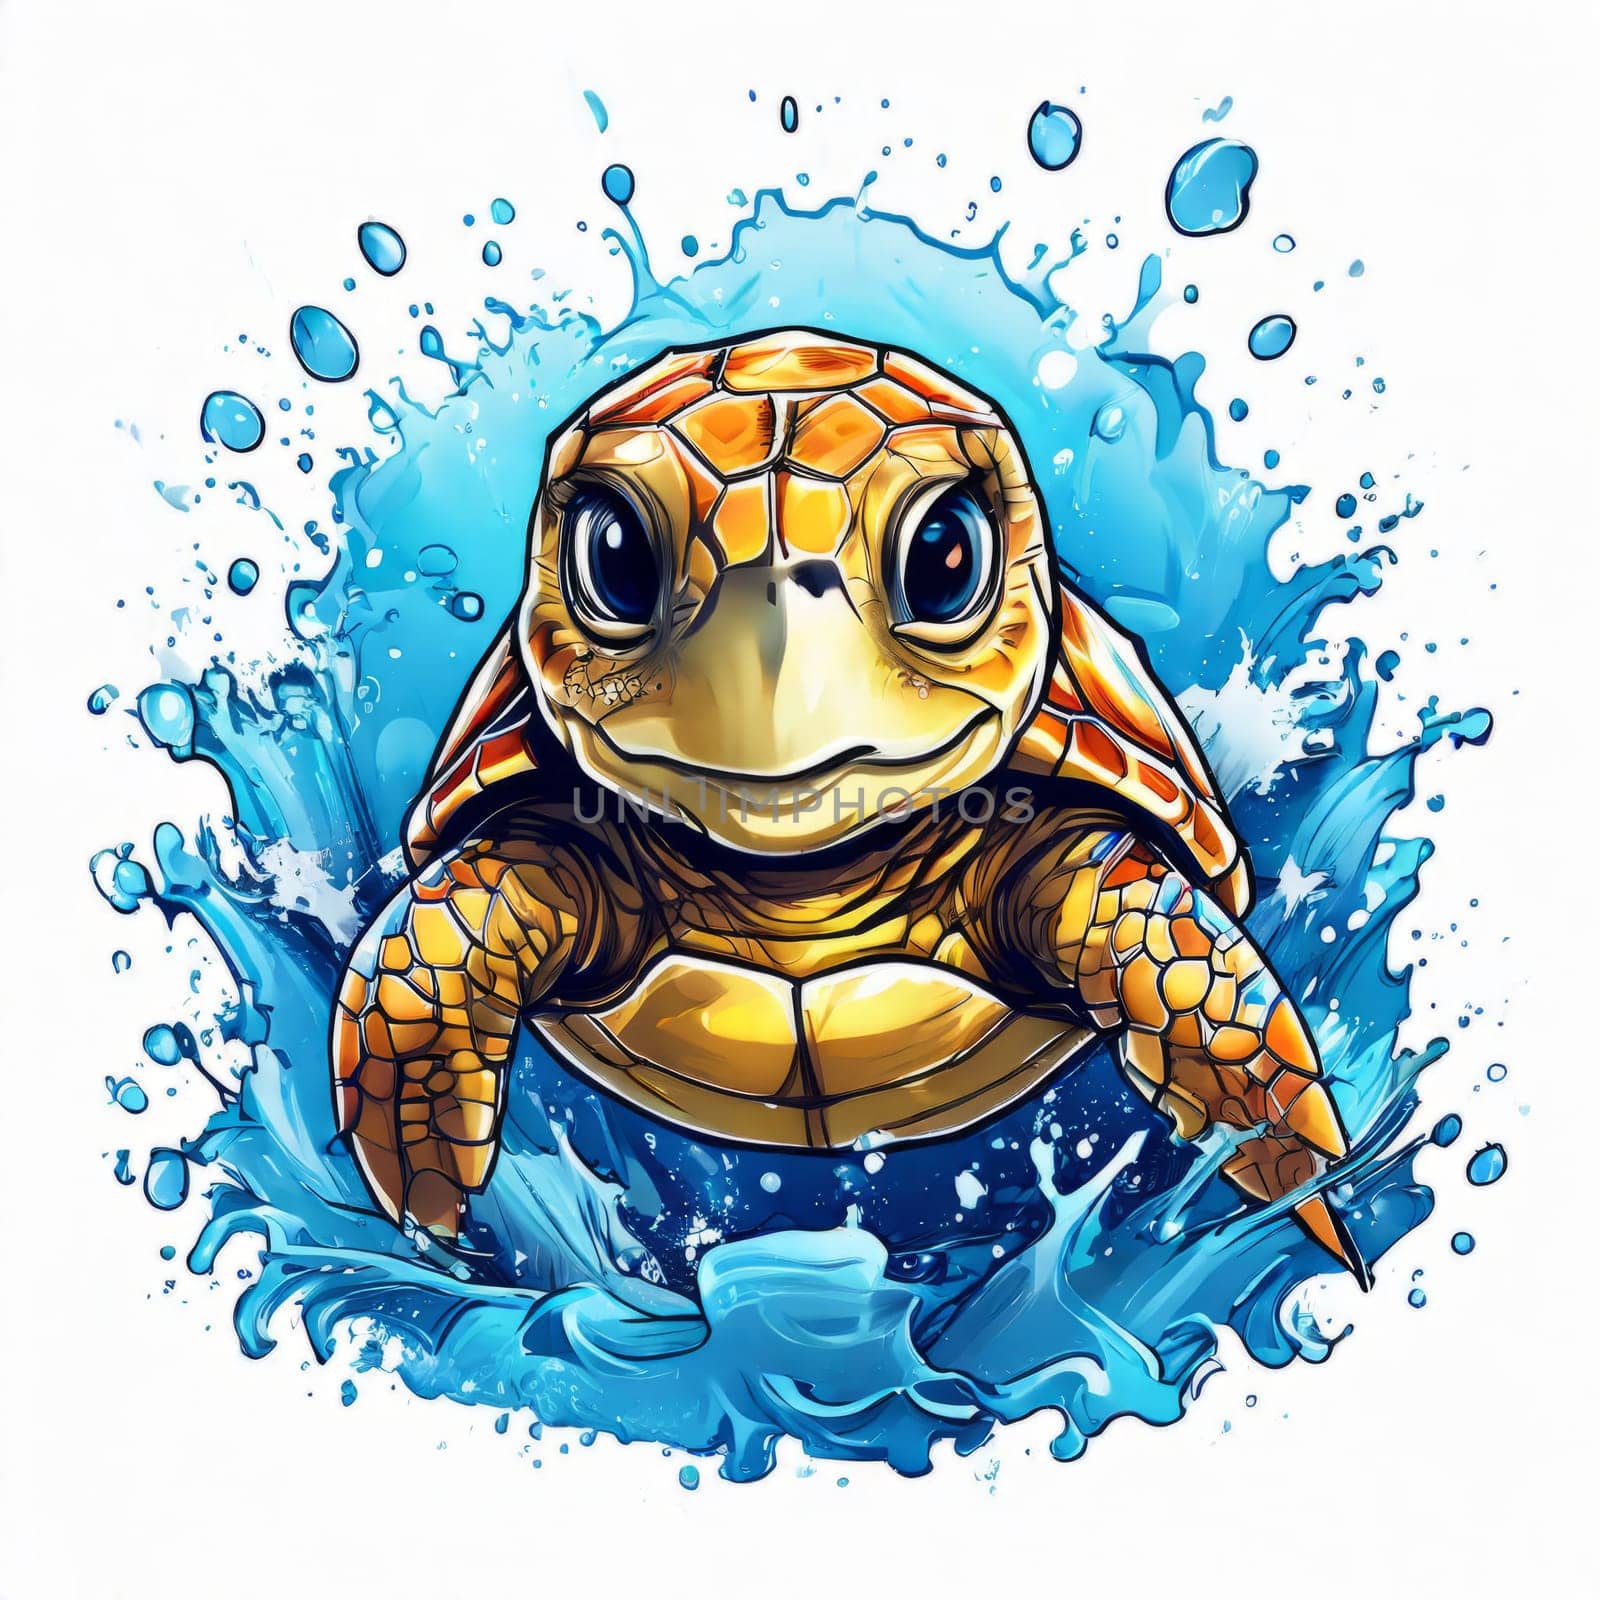 Serene turtle gracefully swimming through water amidst trail of bubbles. For fashion, clothing design, animal themed clothing advertising, as illustration for interesting clothing style,Tshirt design. by Angelsmoon